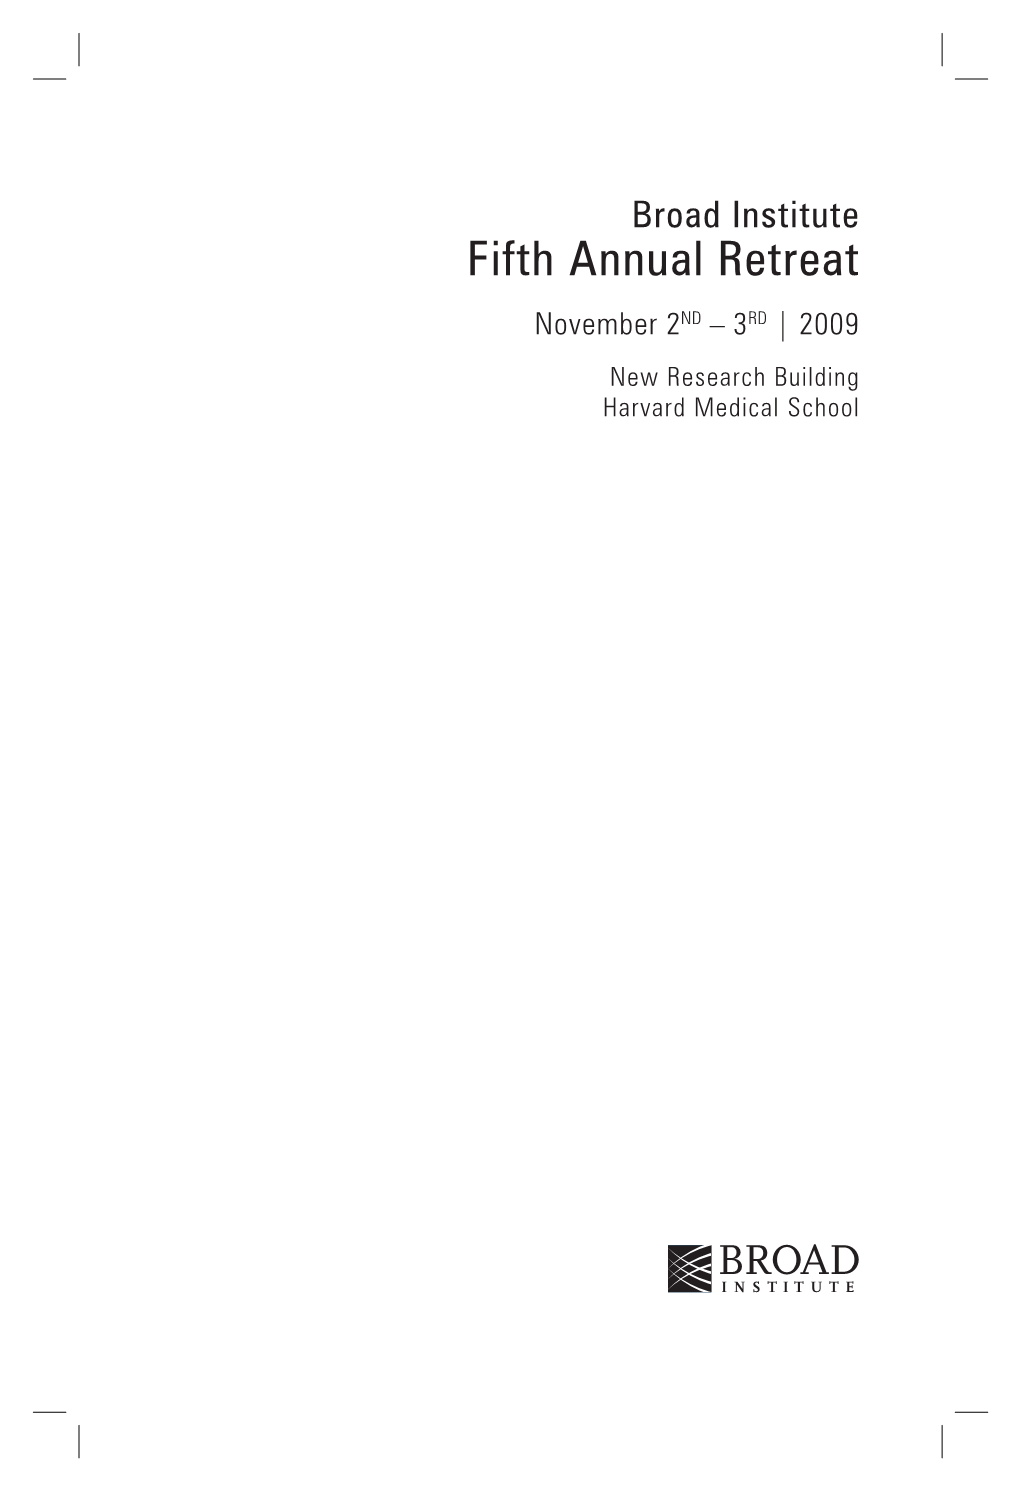 Fifth Annual Retreat November 2ND – 3RD | 2009 New Research Building Harvard Medical School